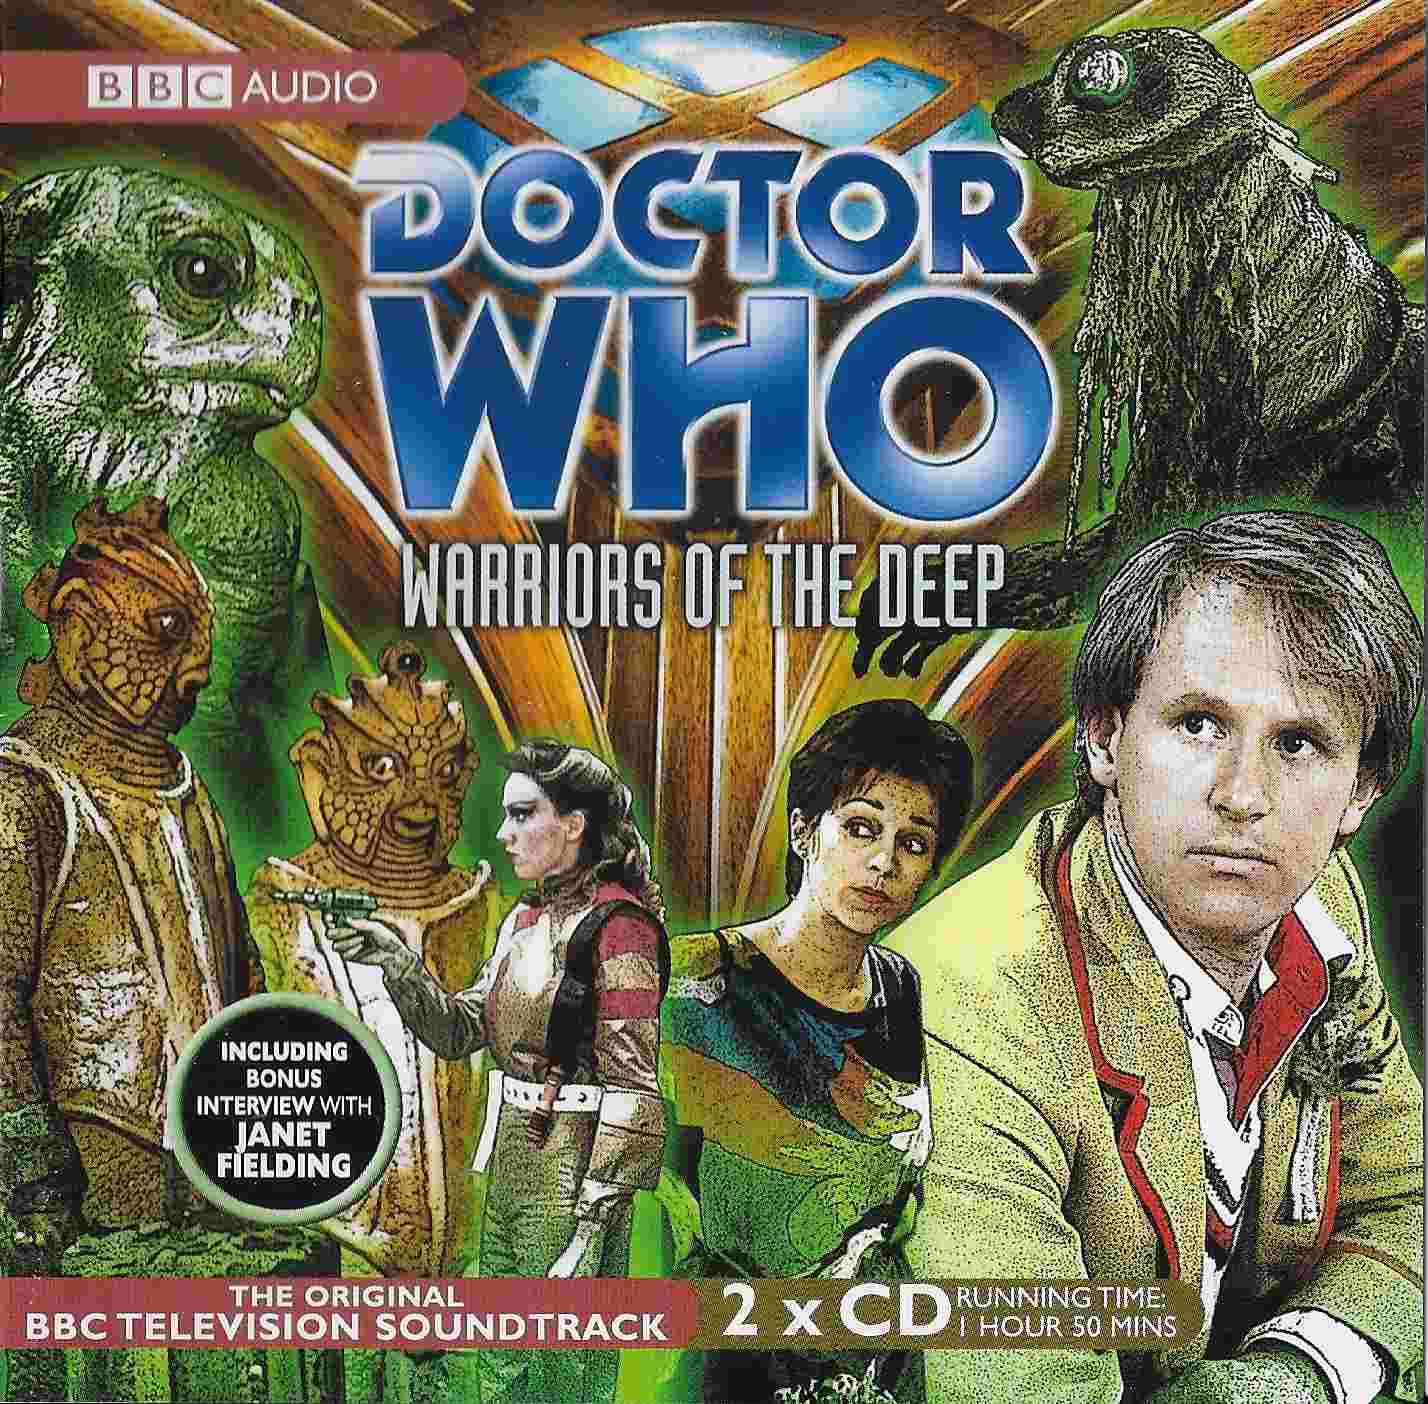 Picture of ISBN 1-4056-7738-4 Doctor Who - Warriors of the deep by artist Johnny Byrne from the BBC records and Tapes library